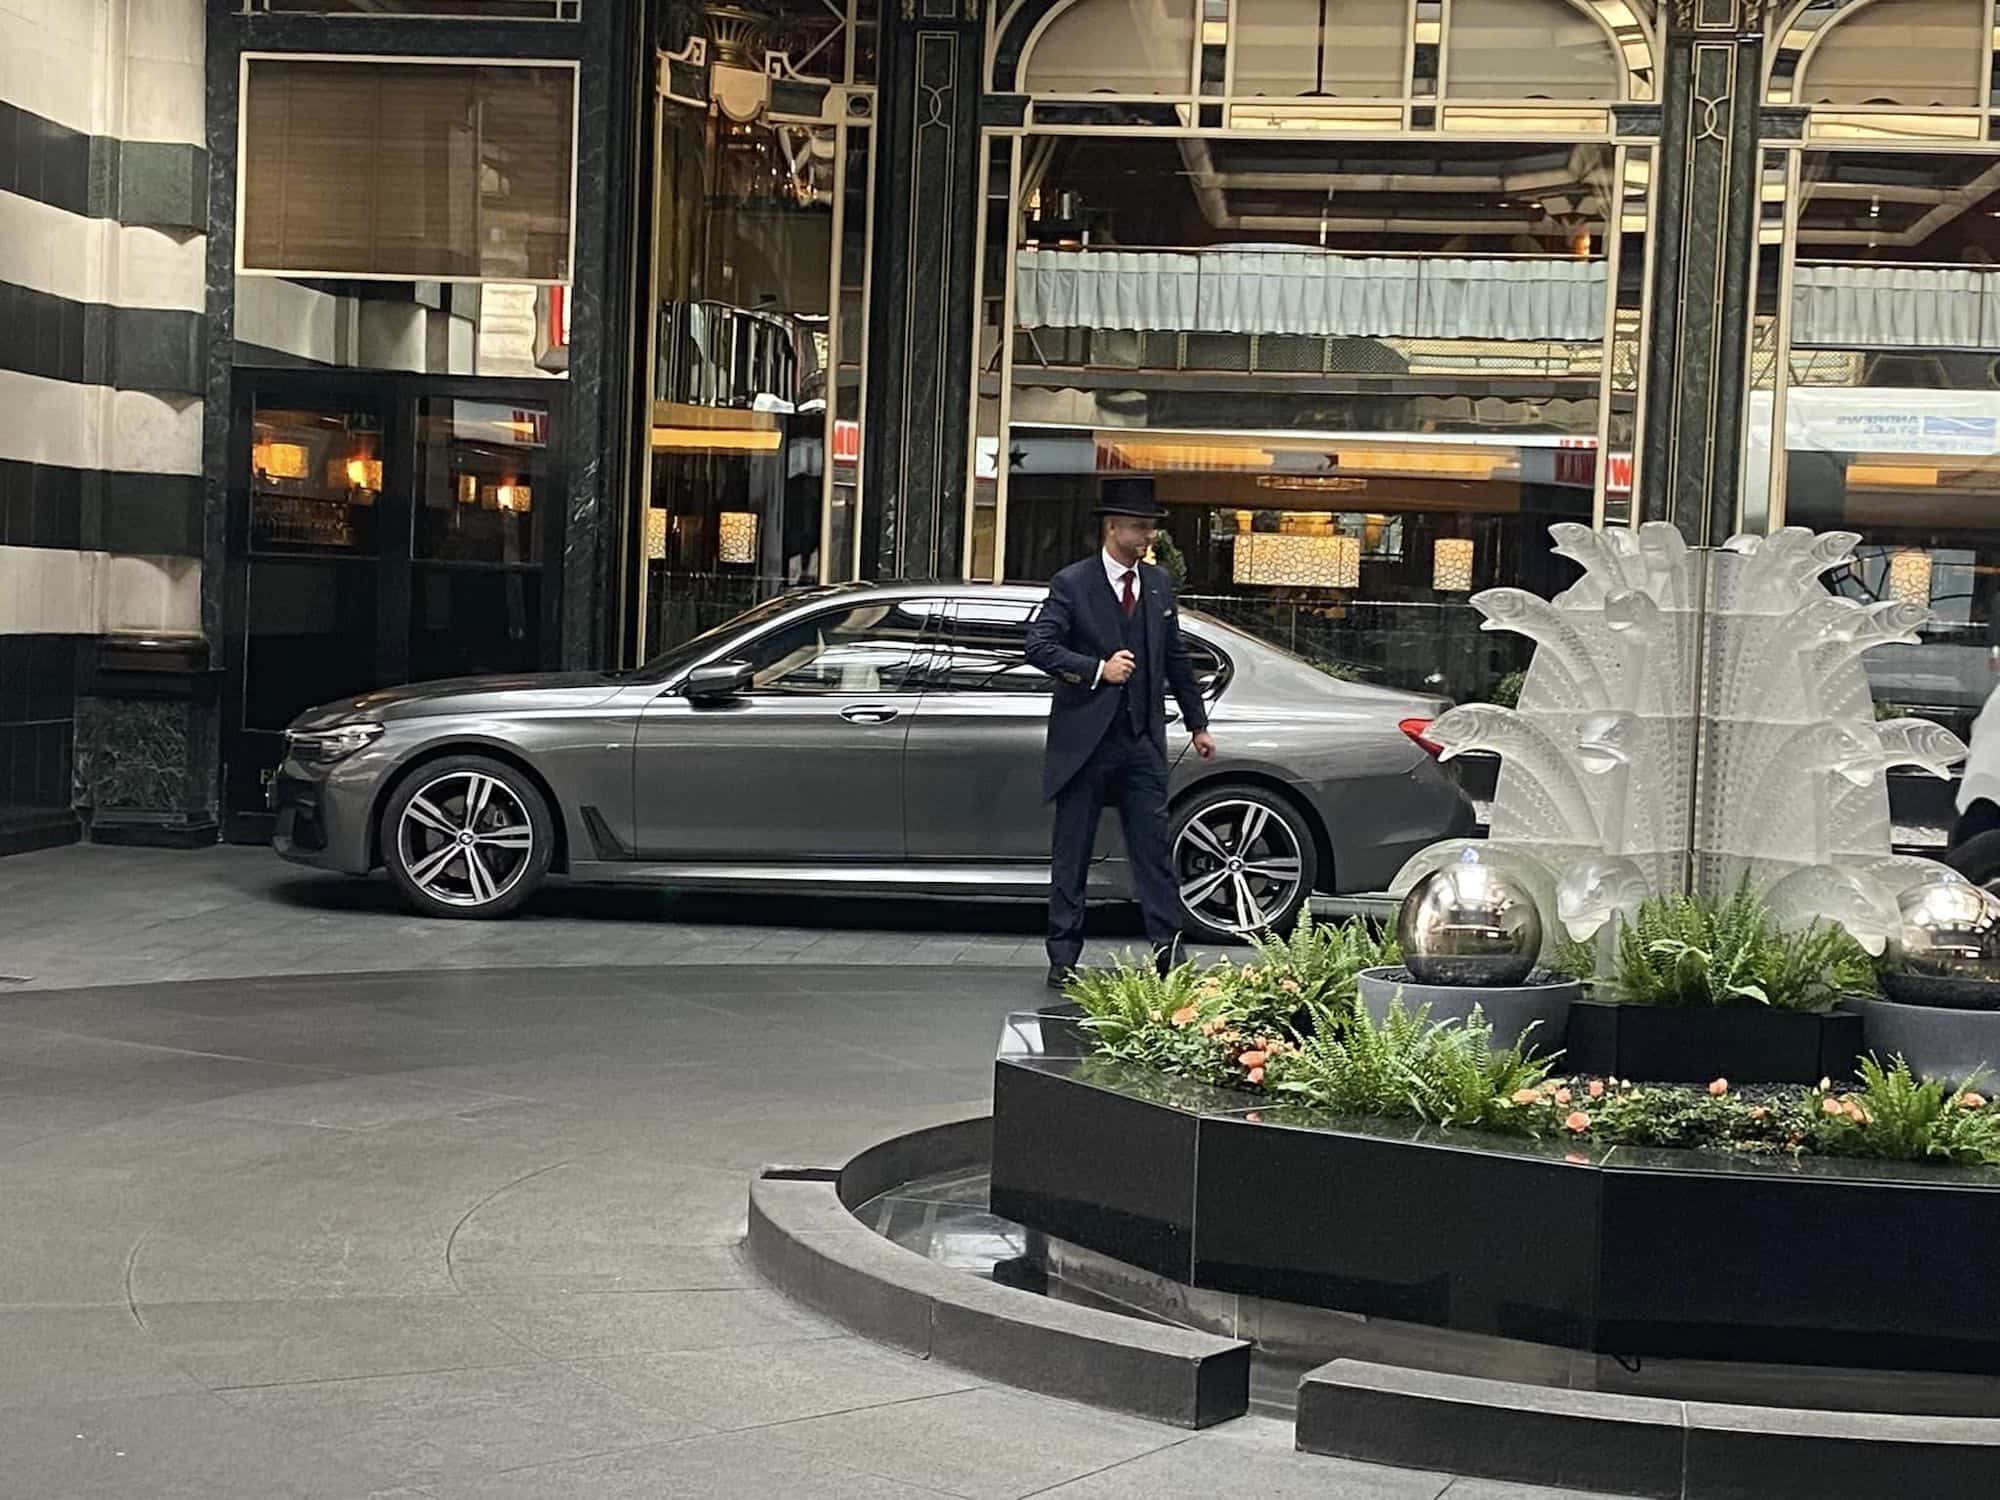 A52 Cars BMW 7 Series parked outside the Savoy Hotel in London